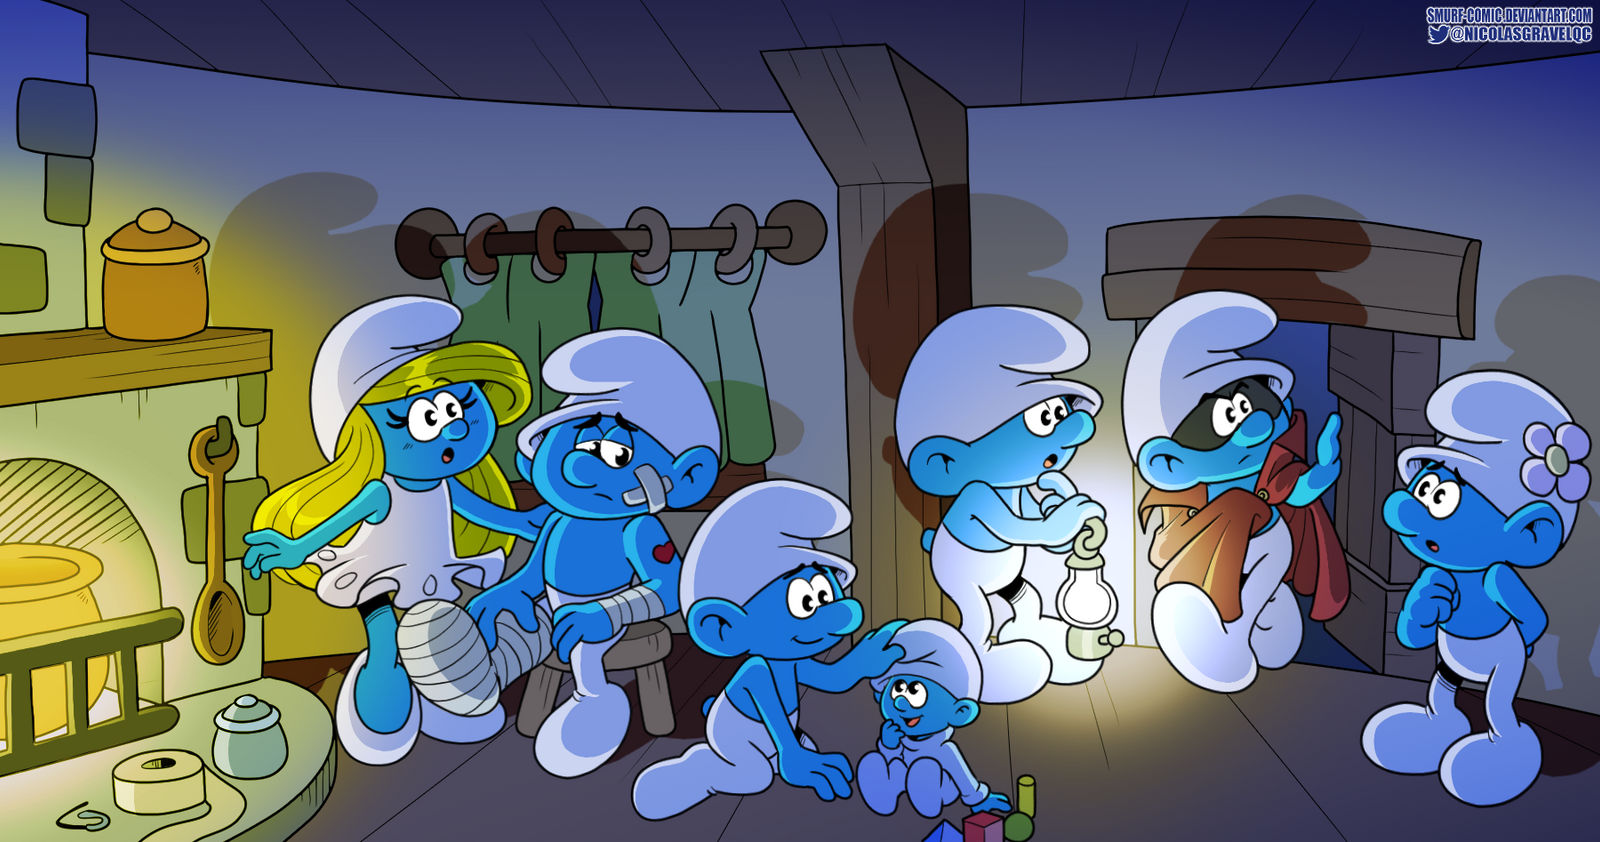 Rise of Grey Smurfette - The Resistance by Smurf-Comic on DeviantArt